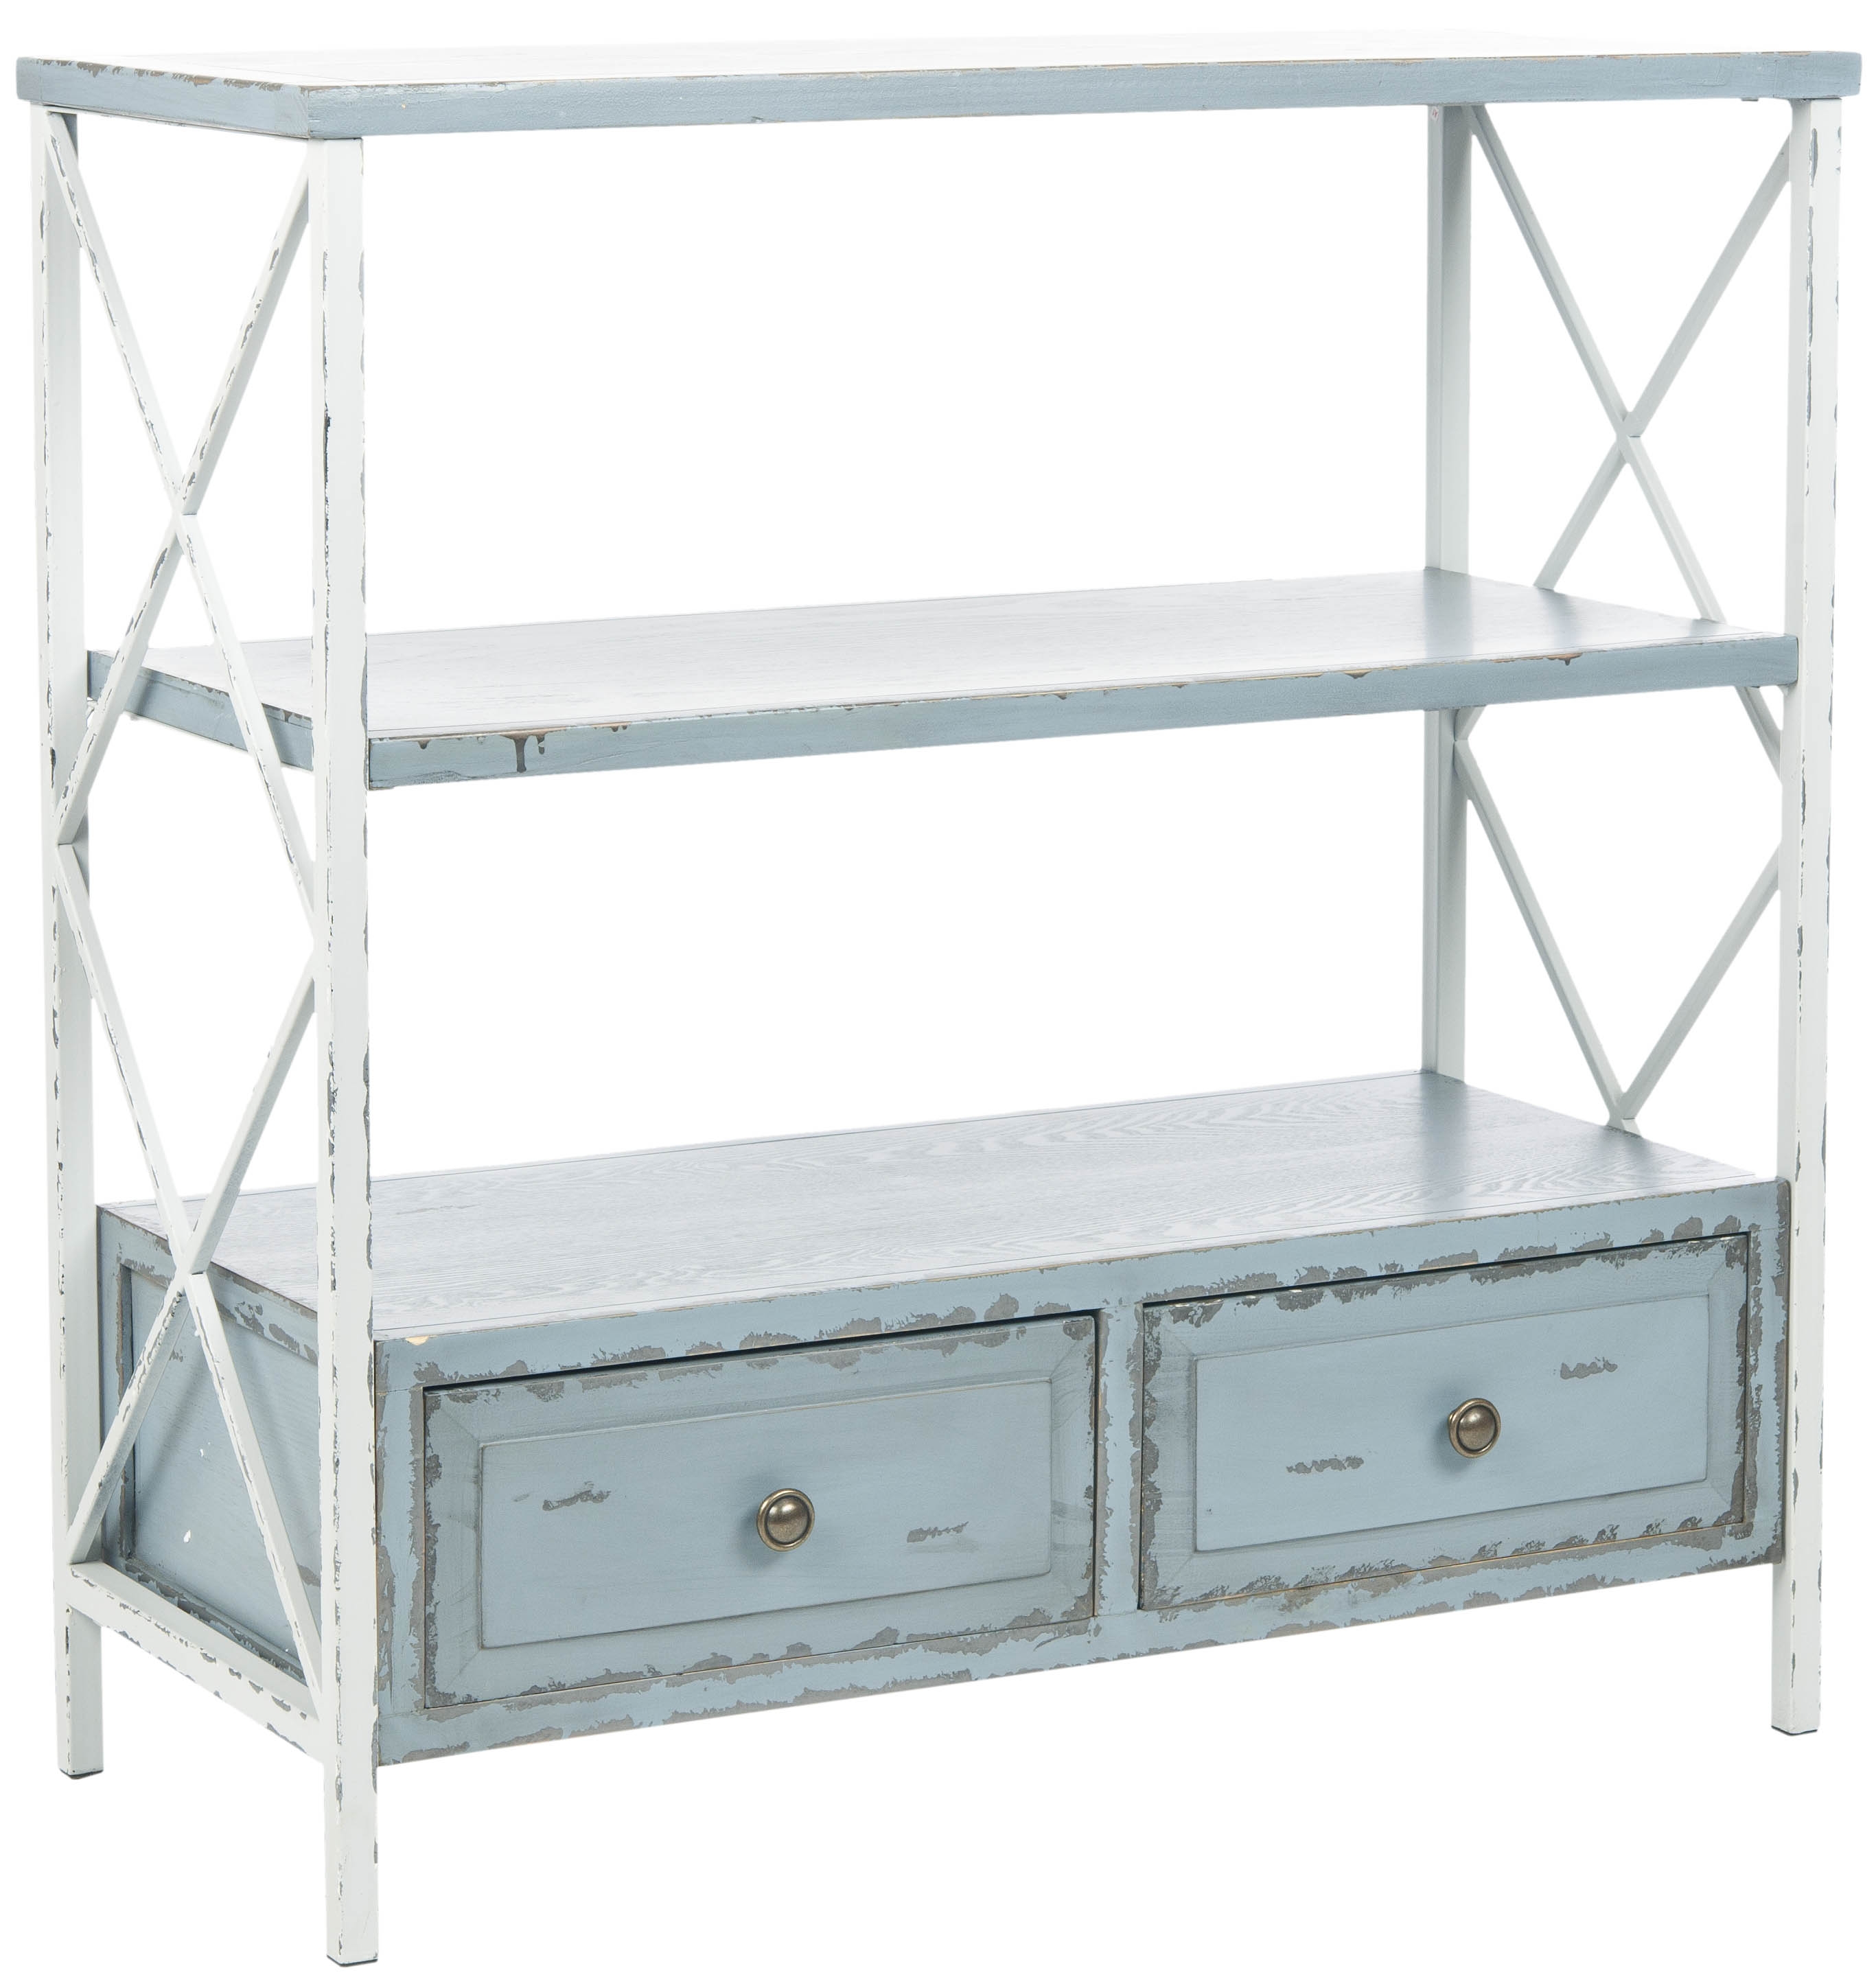 Chandra Console With Storage Drawers - Pale Blue/White Smoke - Arlo Home - Image 1